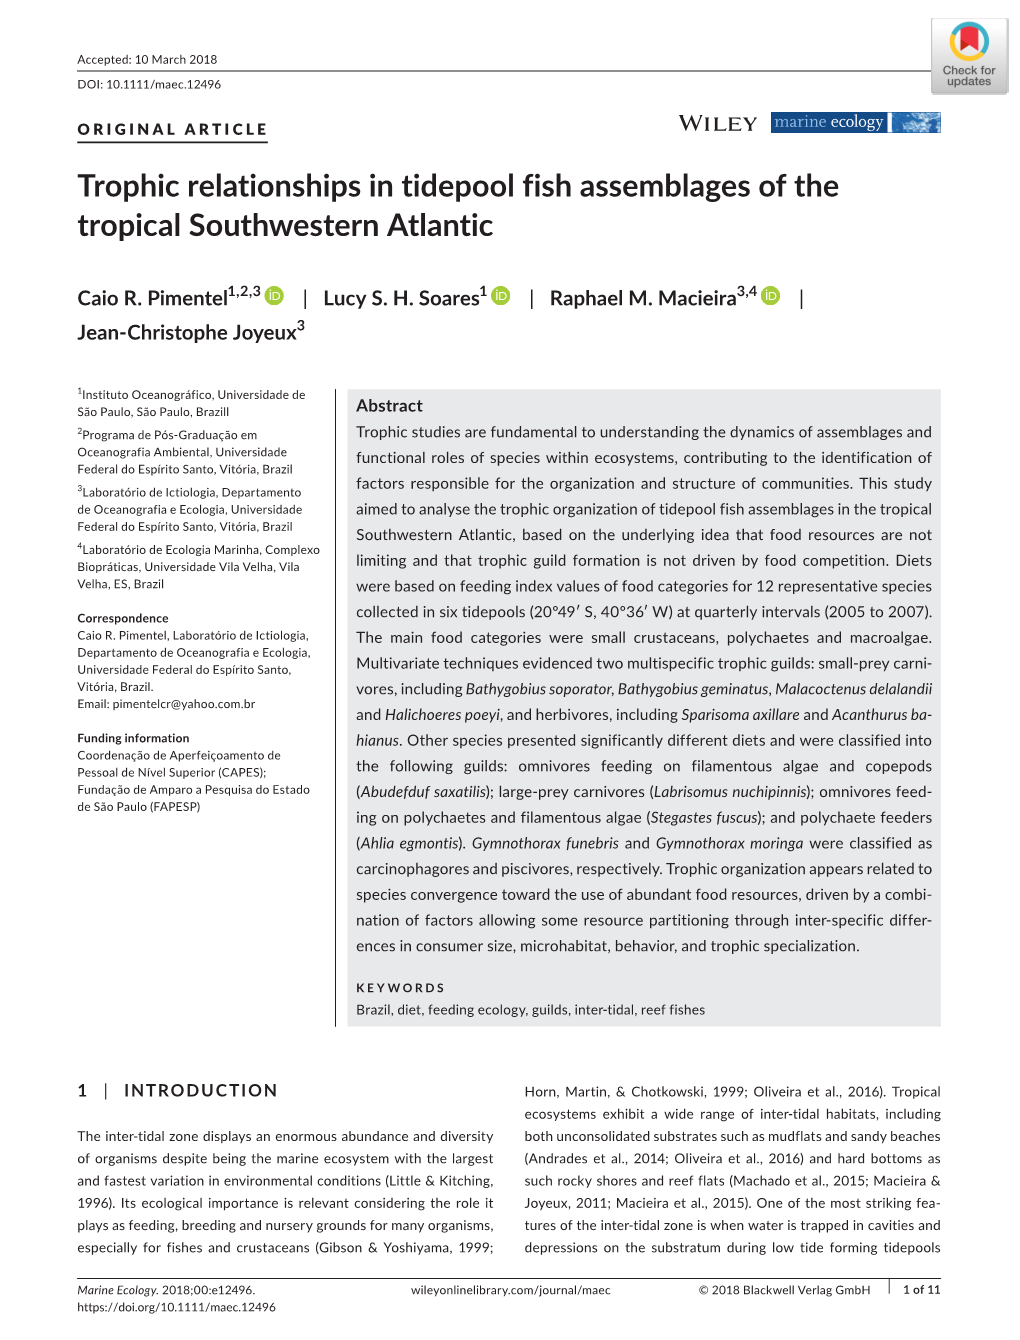 Trophic Relationships in Tidepool Fish Assemblages of the Tropical Southwestern Atlantic